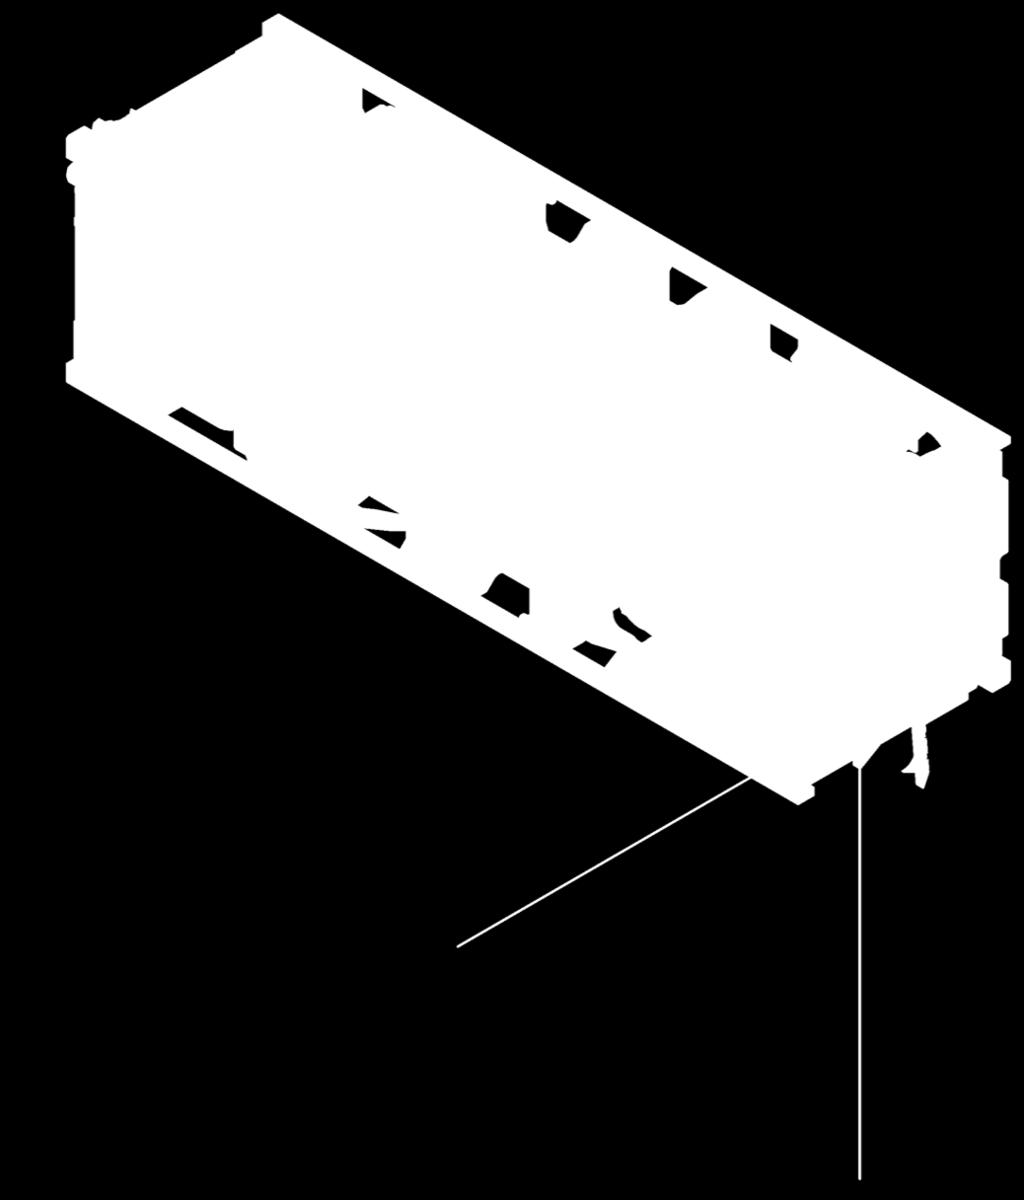 Reference Module (IRM) Battery Module